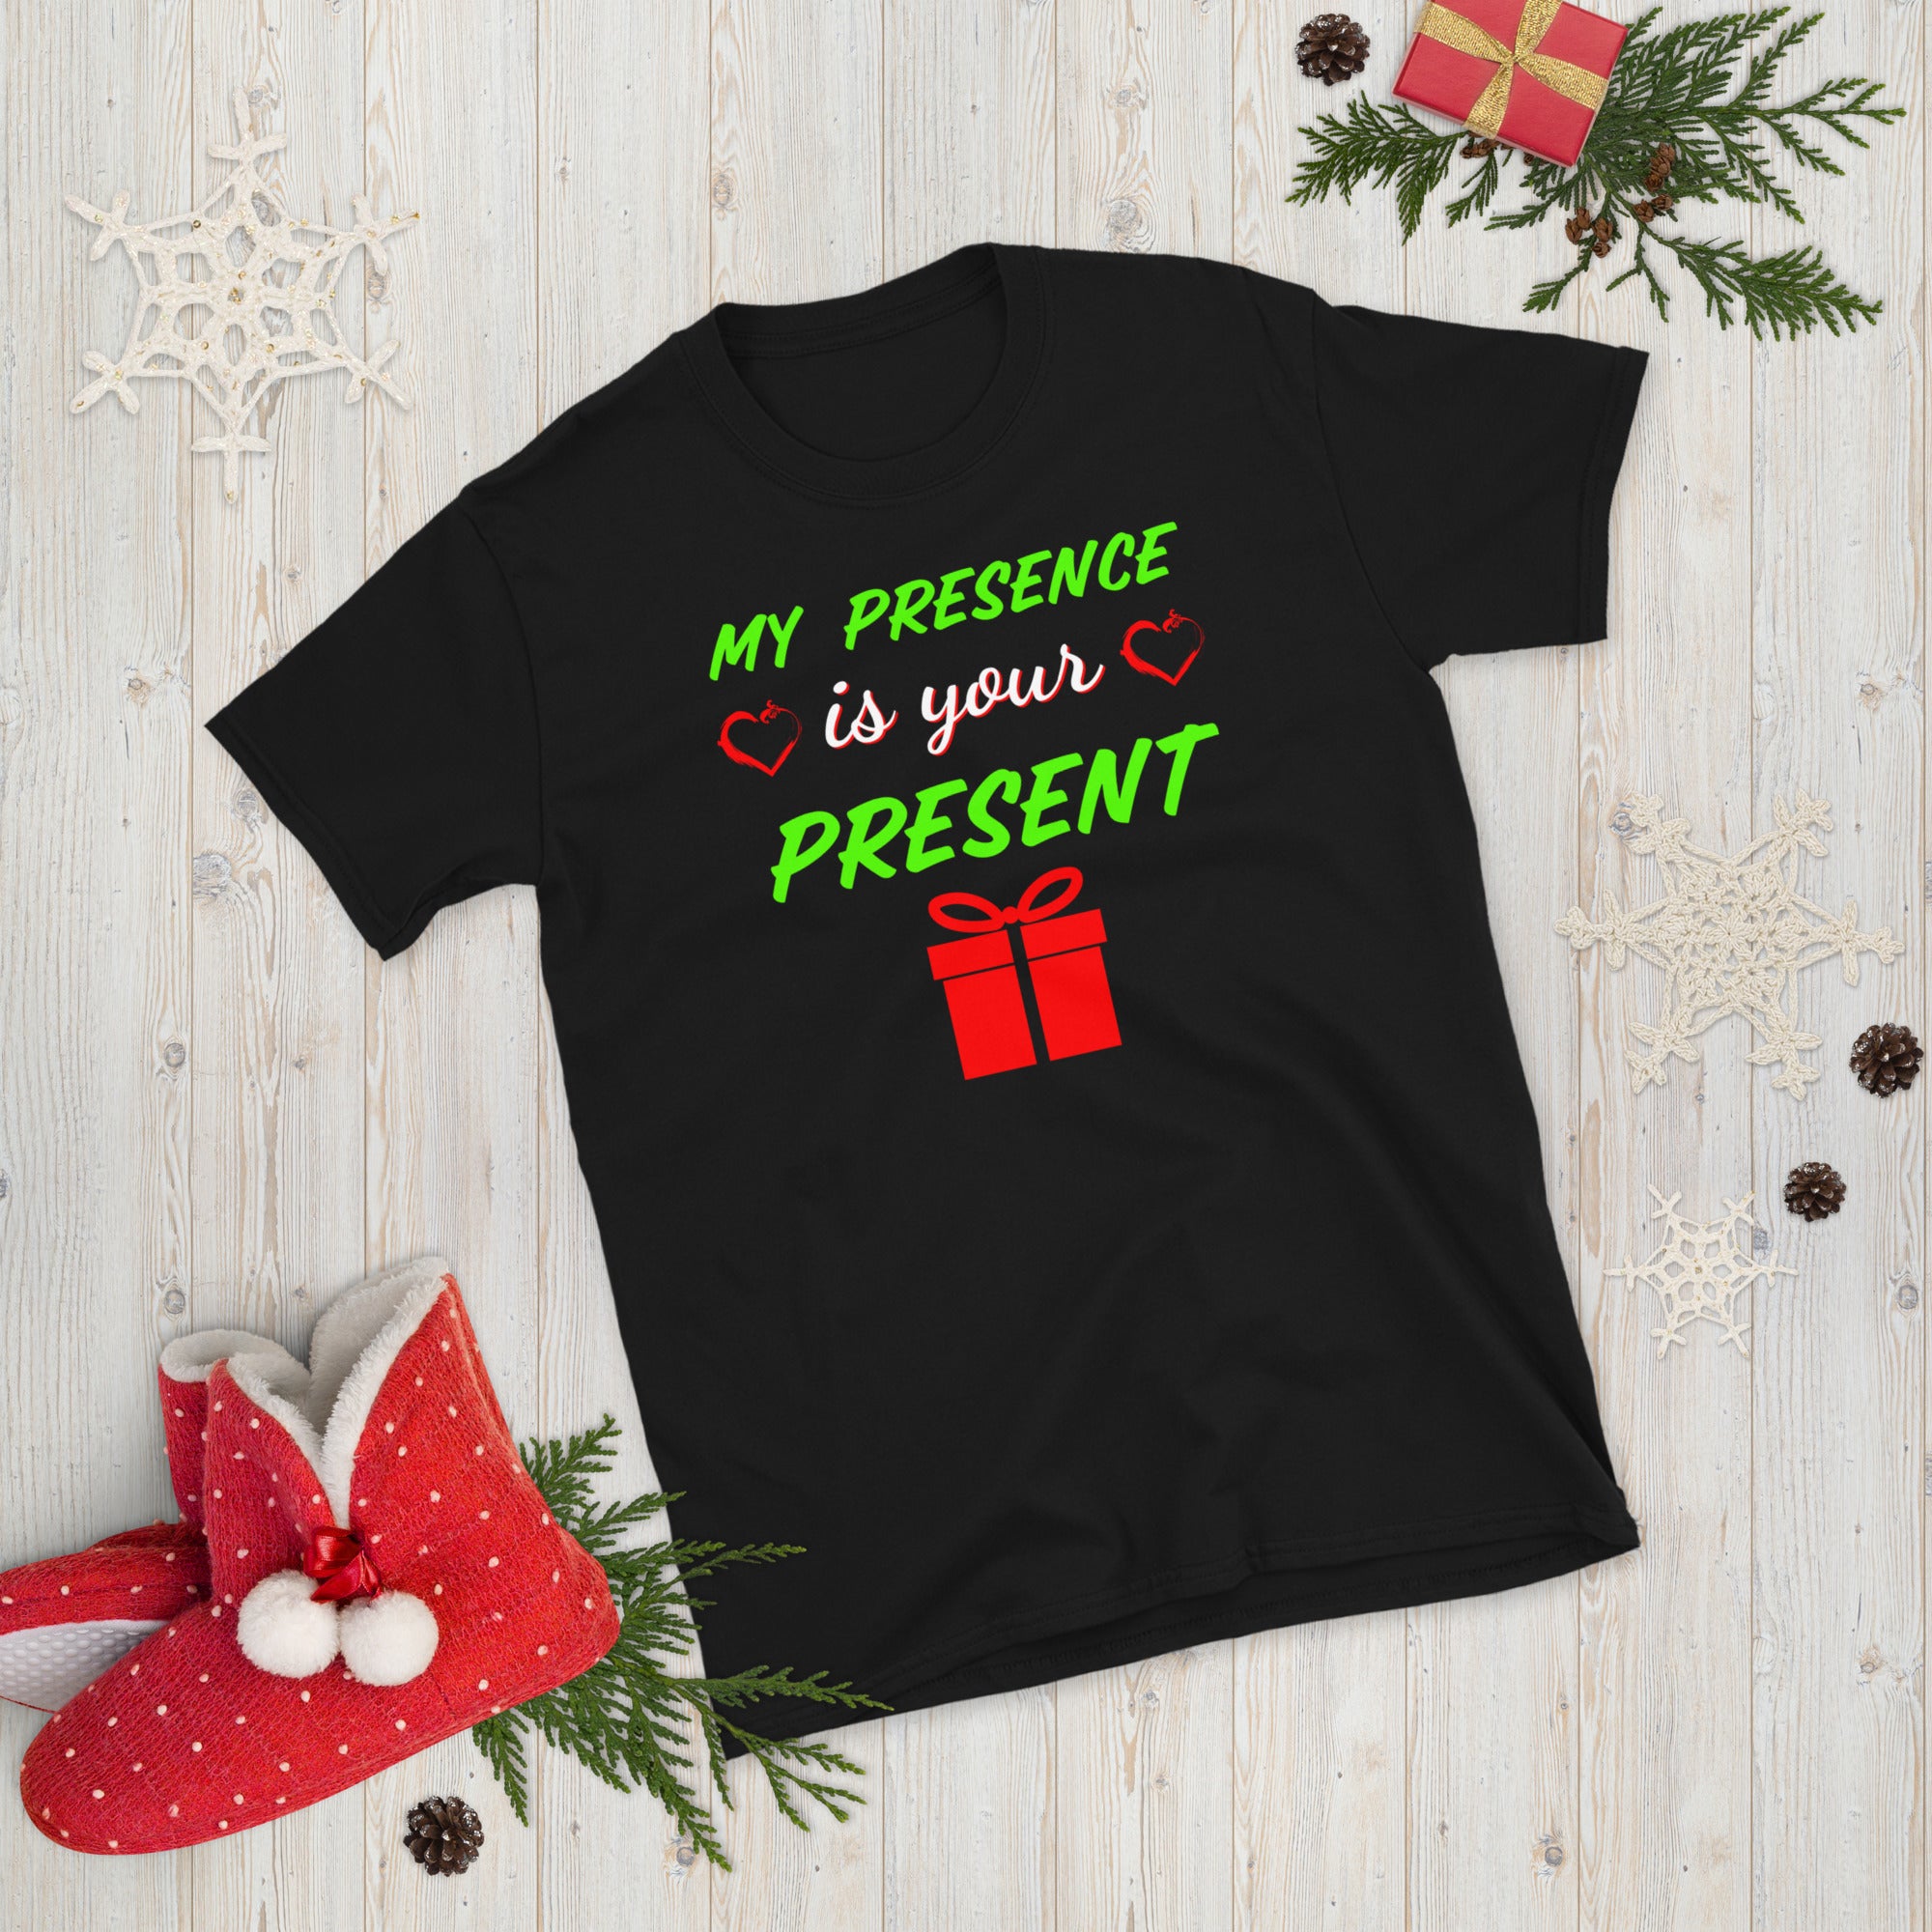 My Presence Is Your Present, Christmas Holiday Shirt, Funny Christmas Shirt, Christmas Shirts, Christmas Gifts For Couples, Xmas Shirts